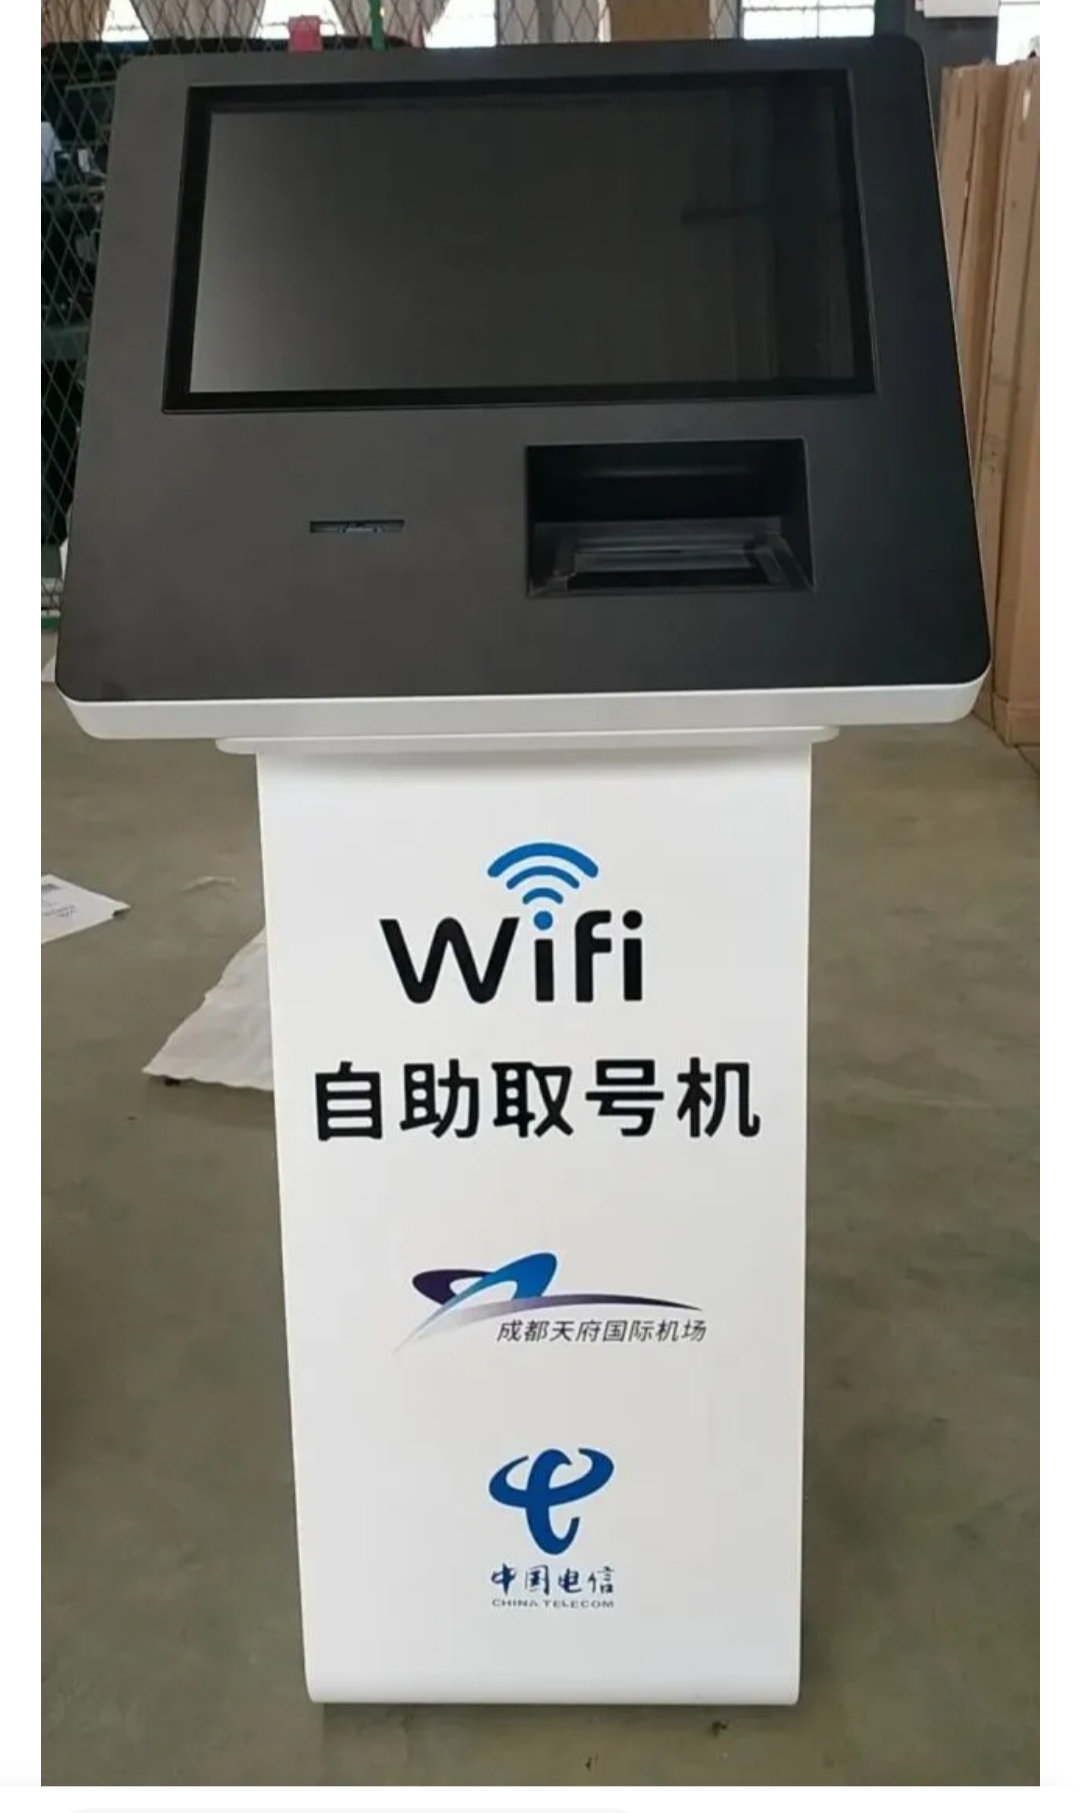 Wifi self service machine to obtain a number